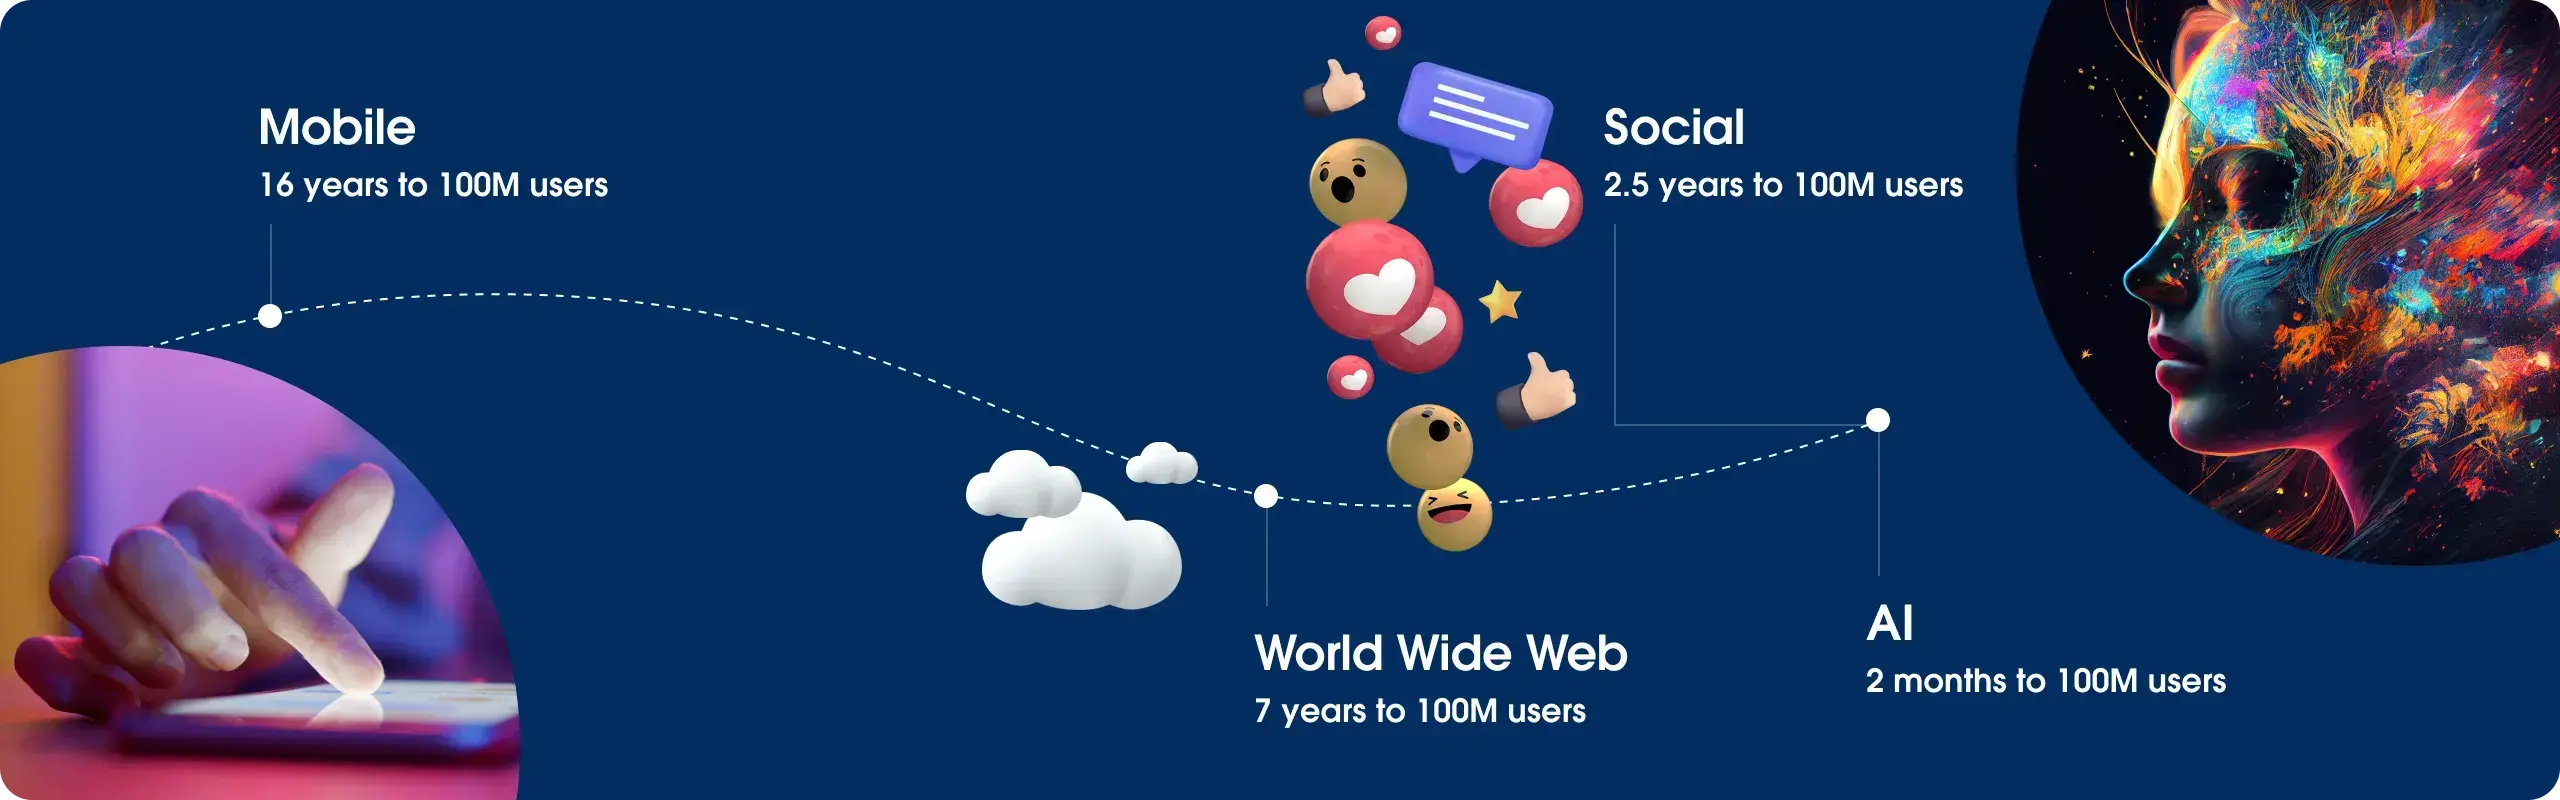 Time to 100 million users. Mobile, 16 years. World wide web, 7 years. Social, 2.5 years. Generative AI, 2 months.